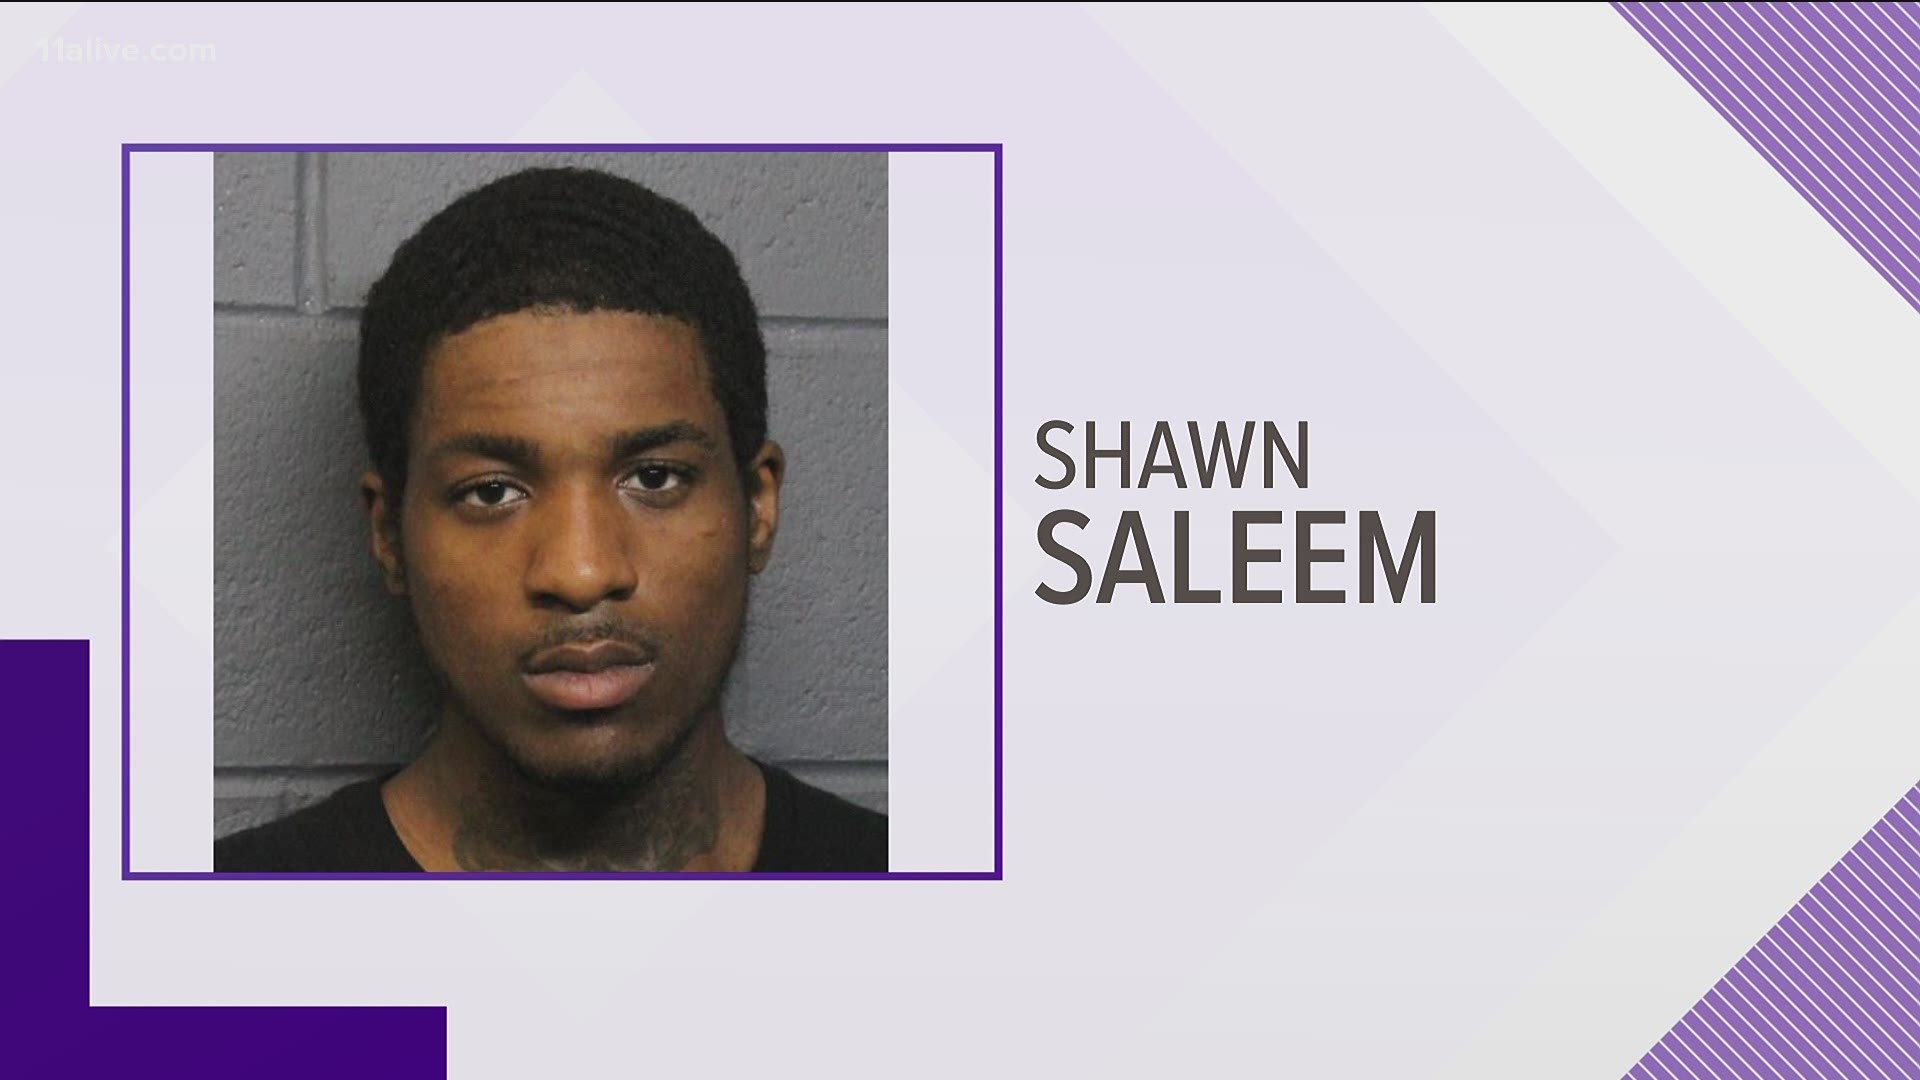 Police said Shawn Mark Anthony Saleem, 25, has an active felony warrant for concealing the death of another.